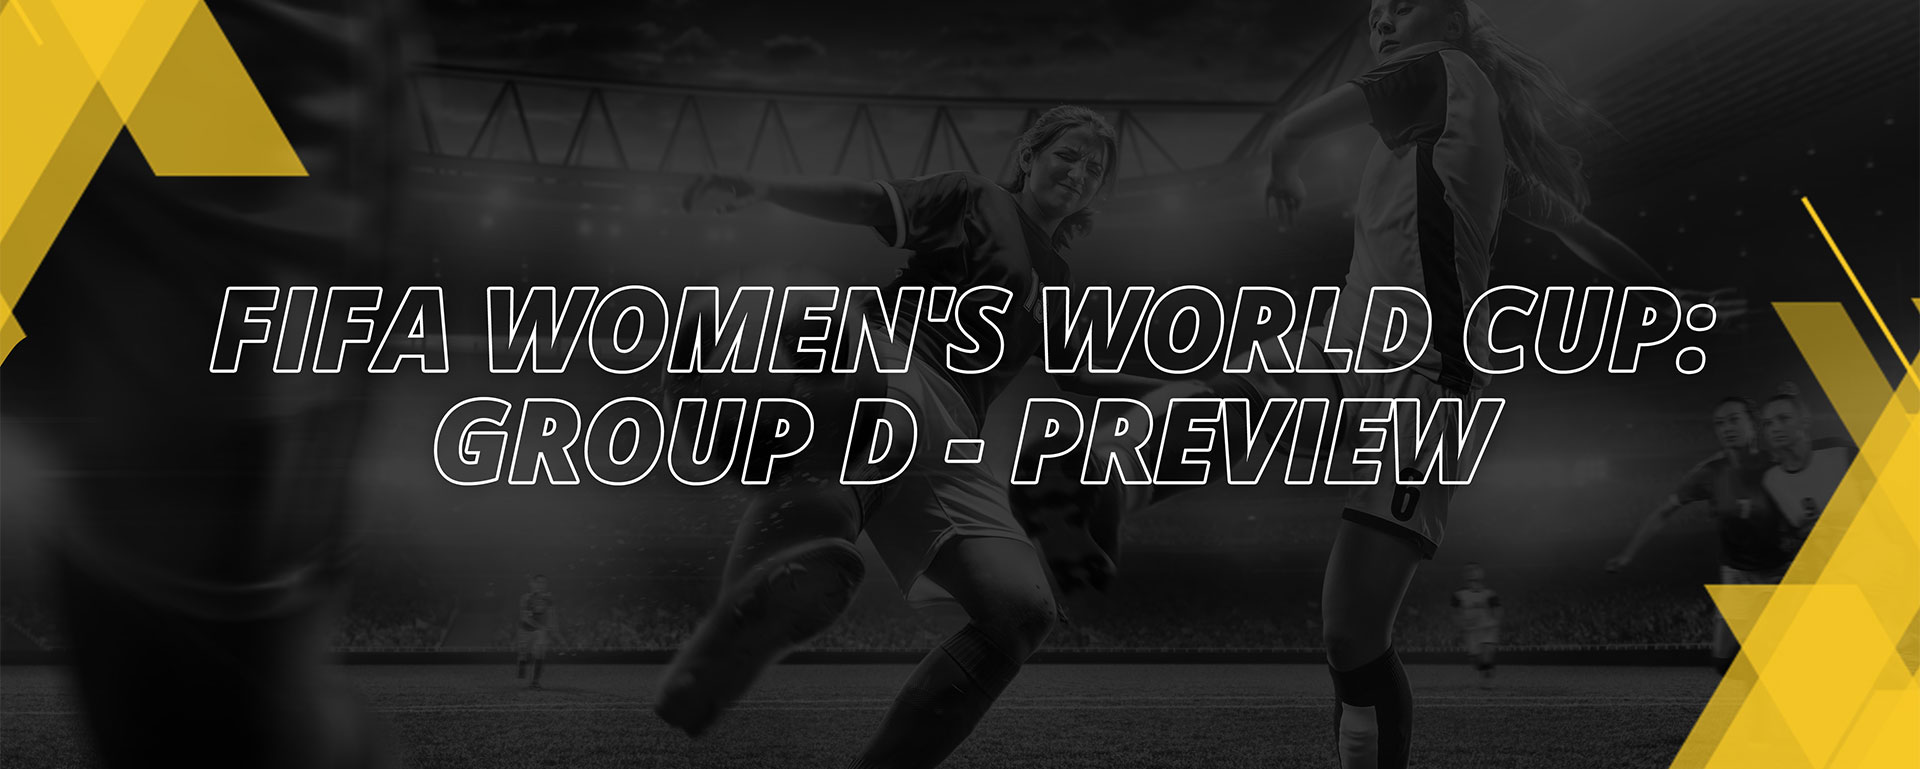 WOMEN’S FIFA WORLD CUP 2023 – GROUP D PREVIEW